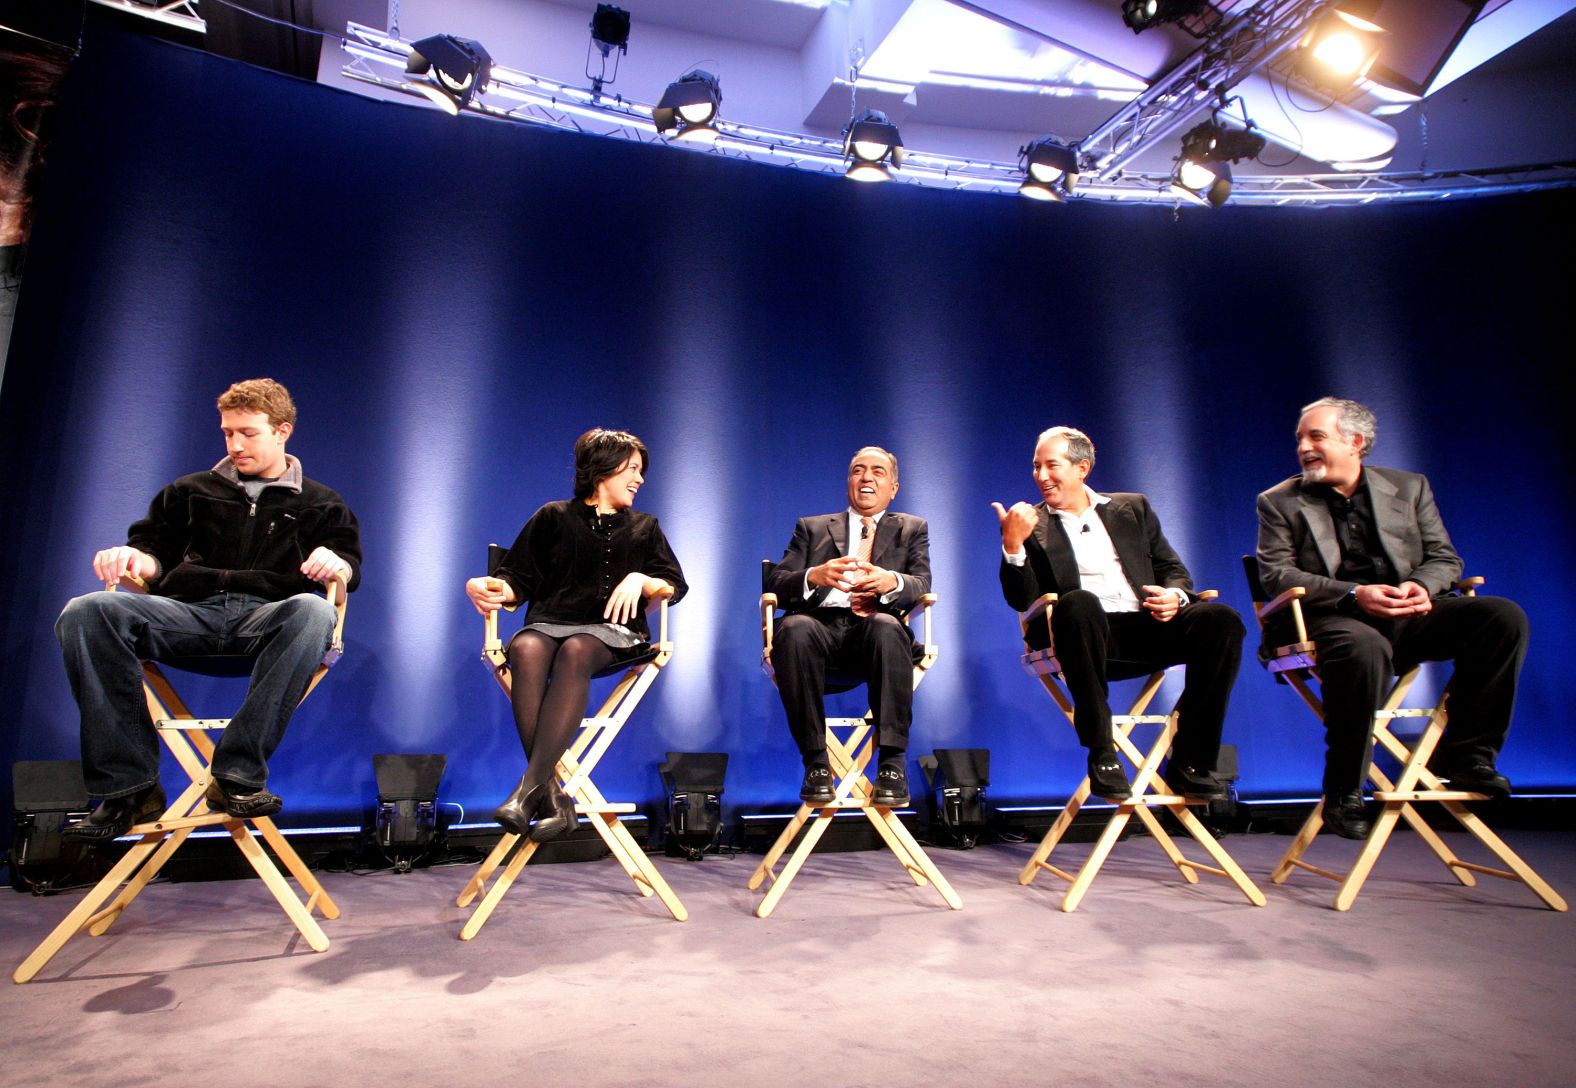 Zuckerberg, far left, attends a panel at the World Economic Forum in Davos, Switzerland, in January 2007. With him, from left, are Flickr co-founder Caterina Fake, Orange CEO Sanjiv Ahuja, Reuters CEO Thomas Glocer and Kapor Enterprises President Mitchell Kapor.